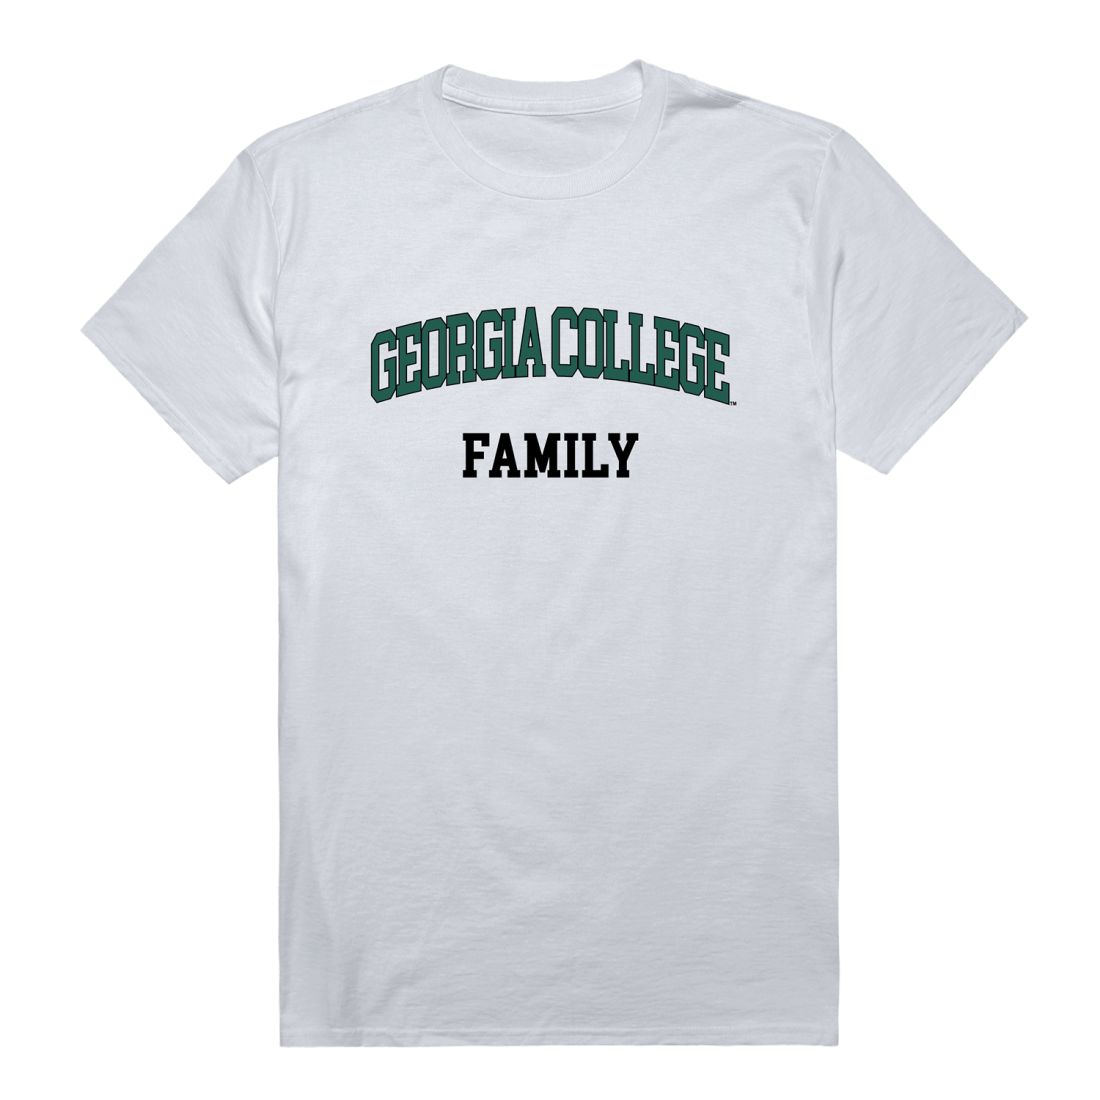 Georgia College and State University Bobcats Family T-Shirt